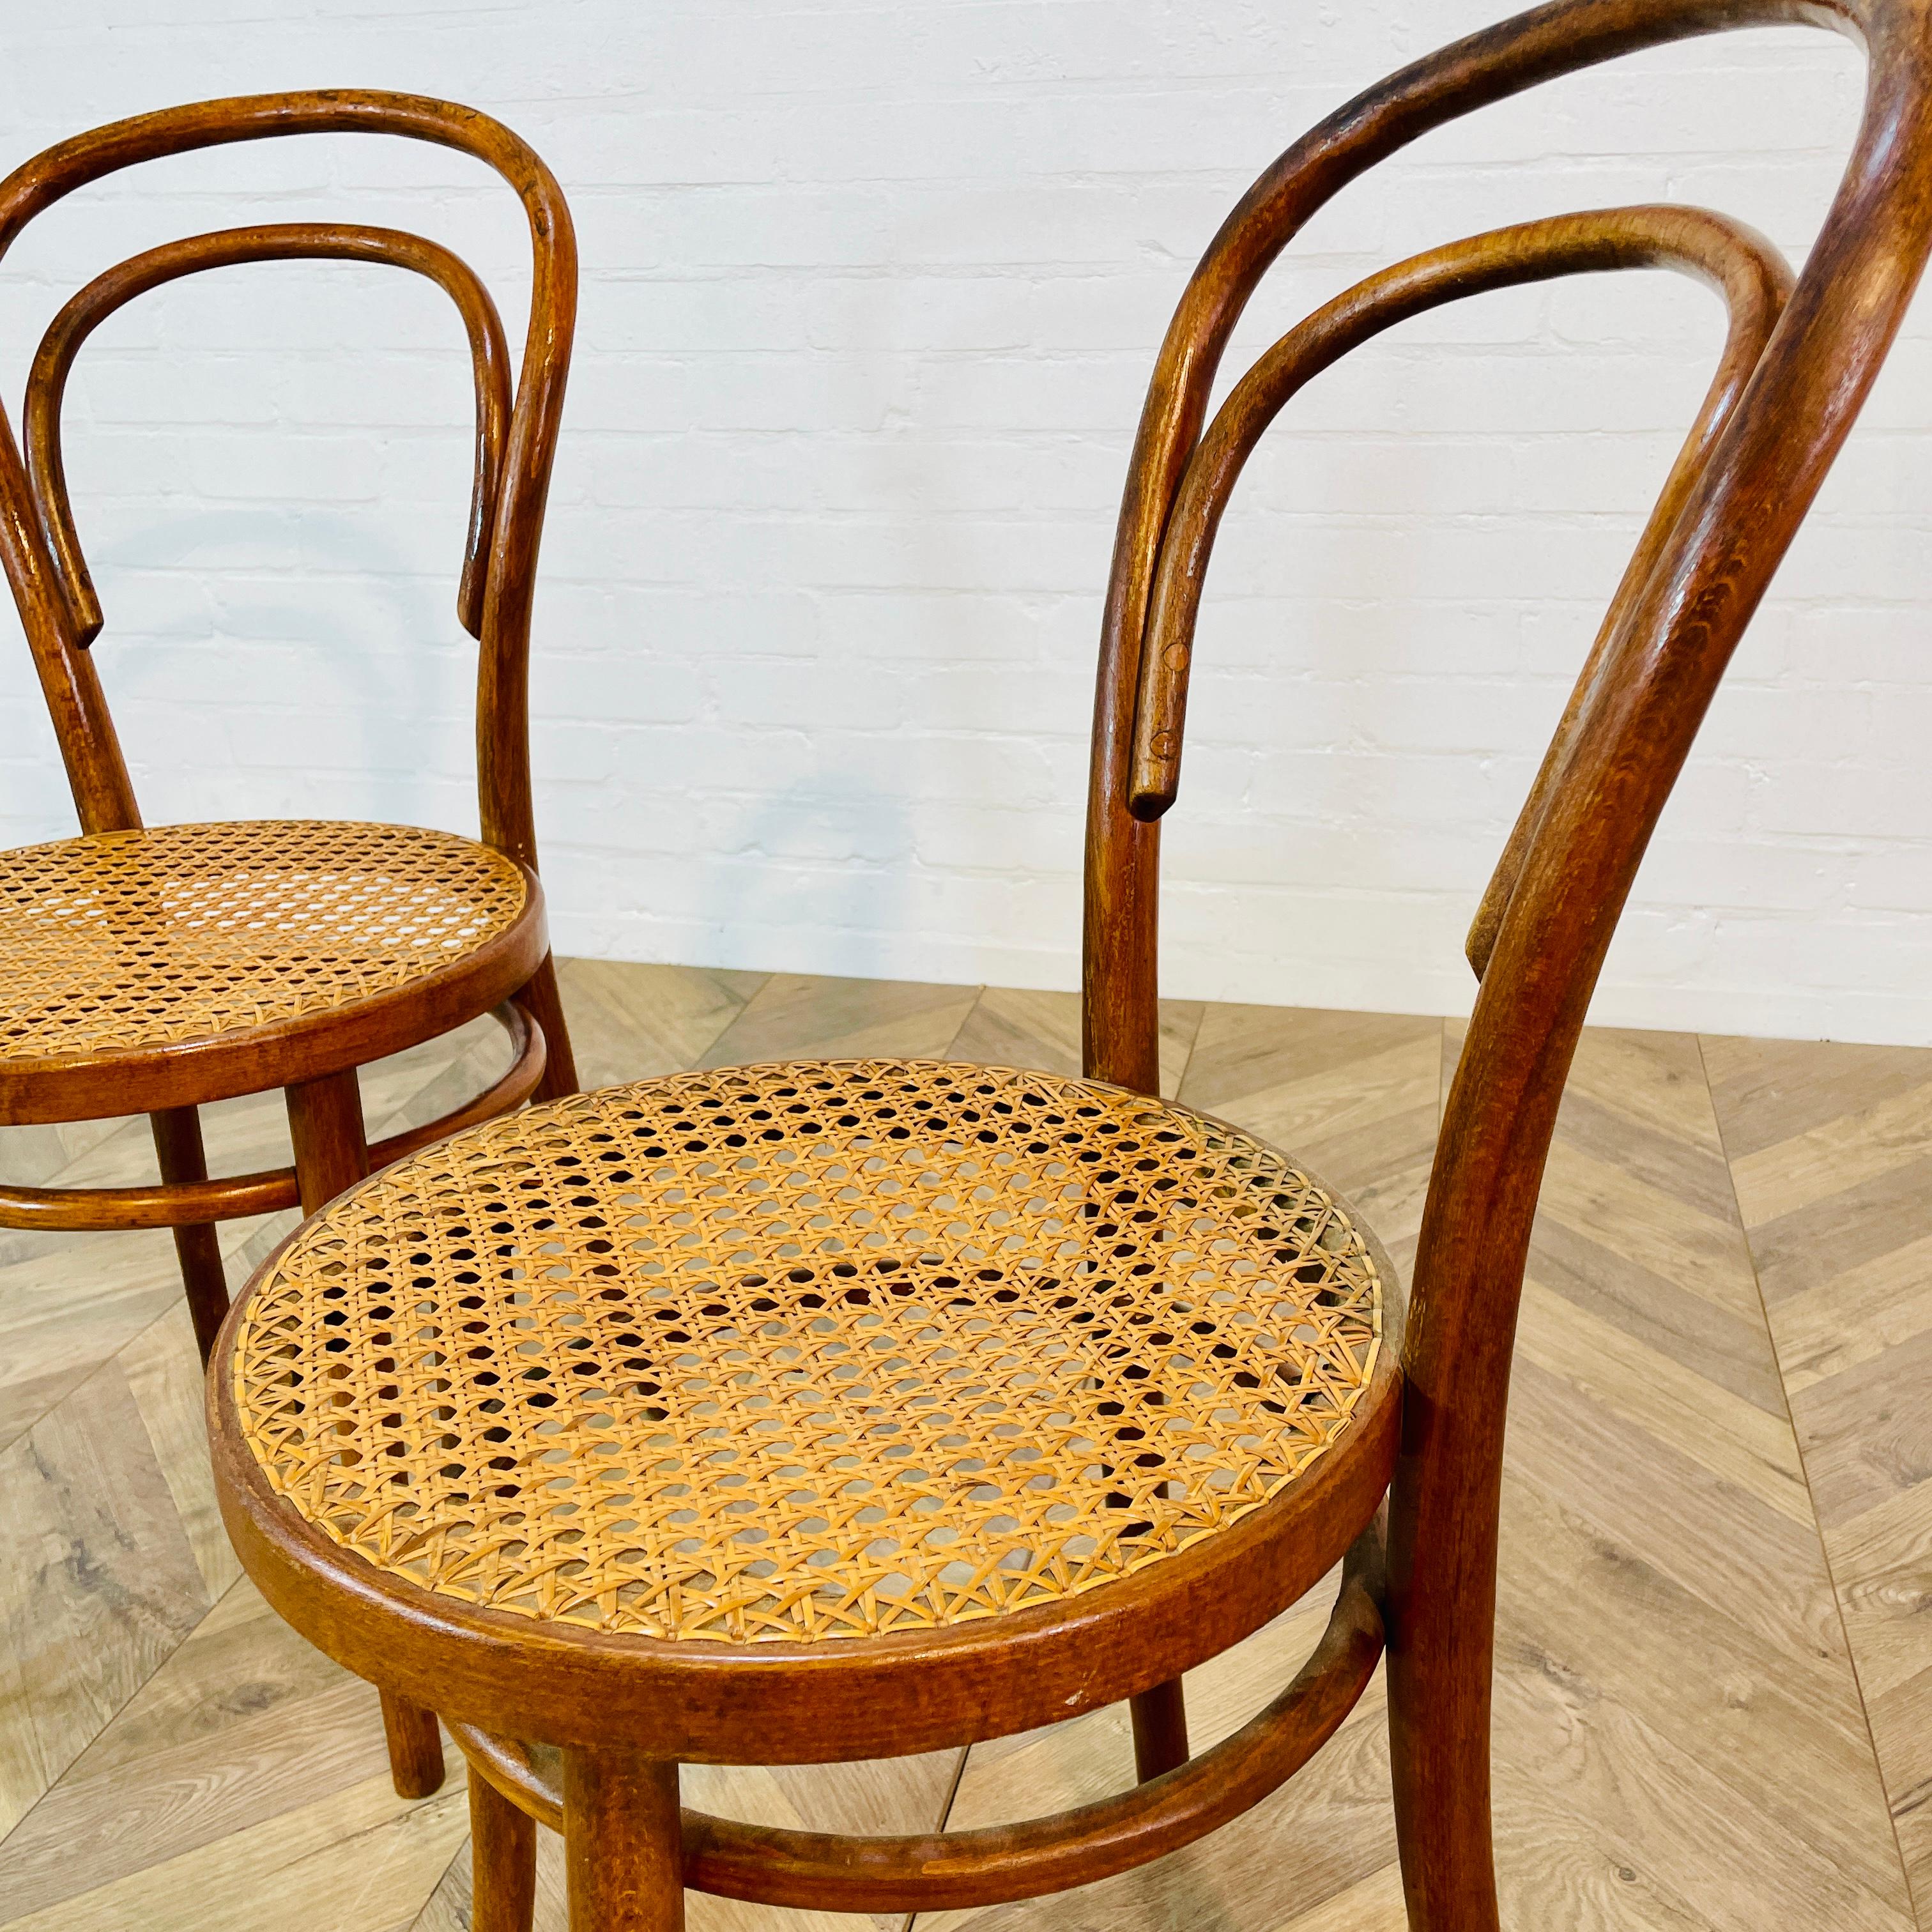 A Pair of Vintage Mid-Century ZPM Radomsko Bentwood & Cane Chairs, circa 1950s.

The chairs made by Polish furniture maker Radomsko ZMG, famed for also making Thonet chairs (same factory) are in a good vintage condition with only small marks and